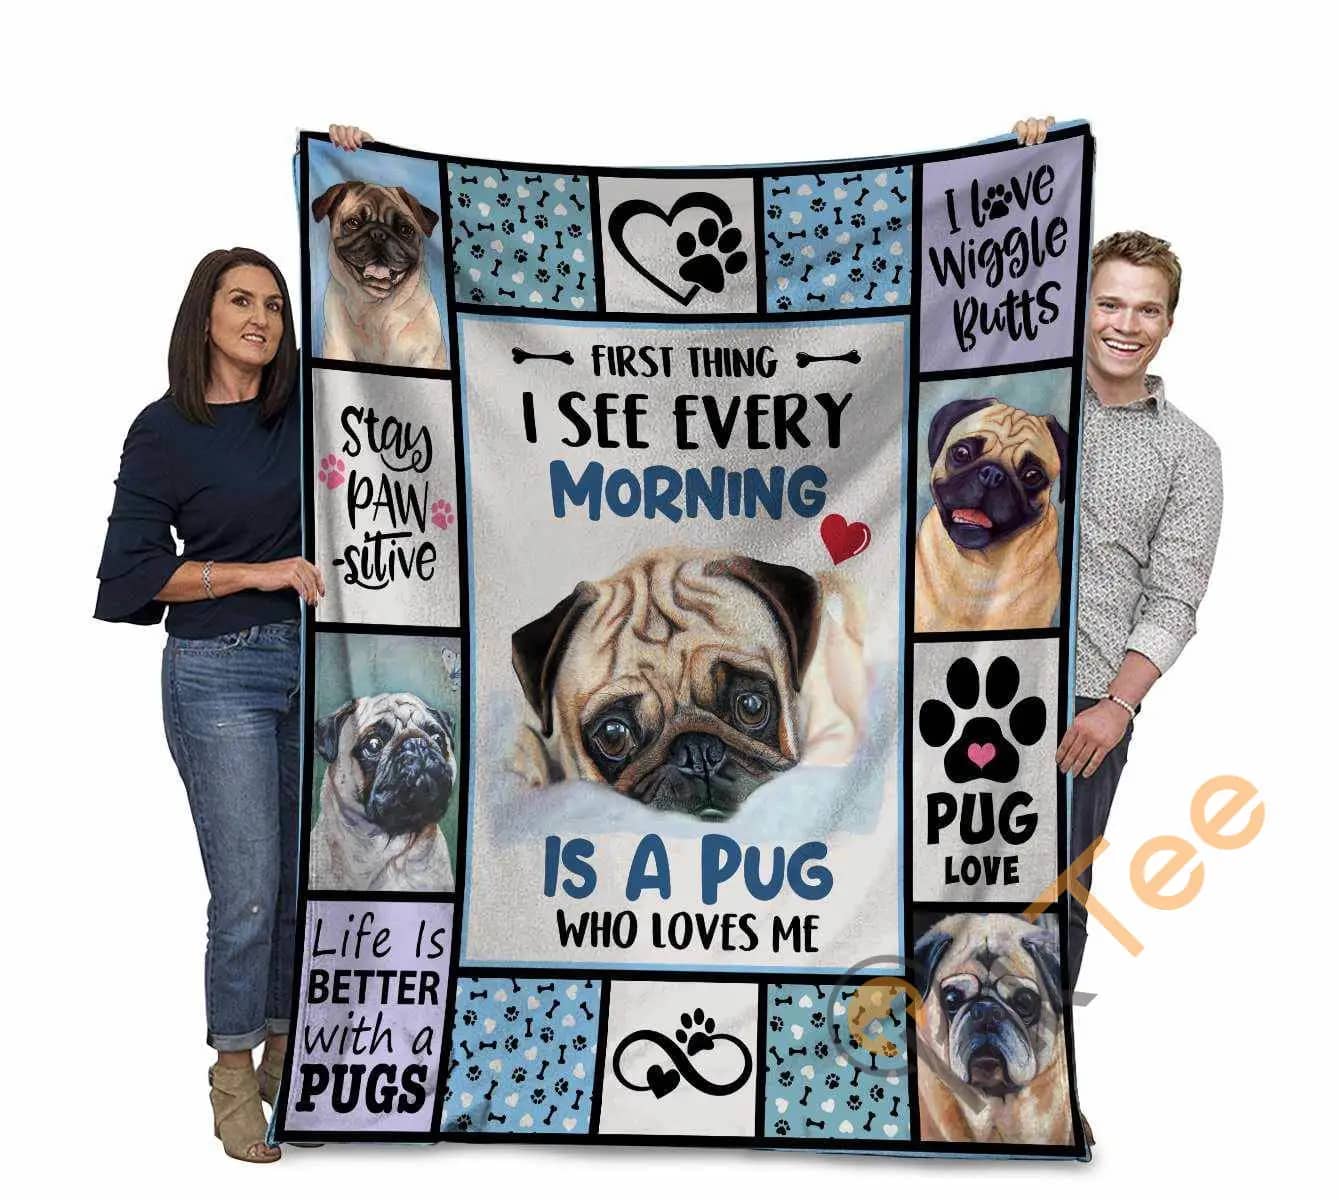 Pug First Thing I See Every Morning Is A Pug Who Loves Me Ultra Soft Cozy Plush Fleece Blanket